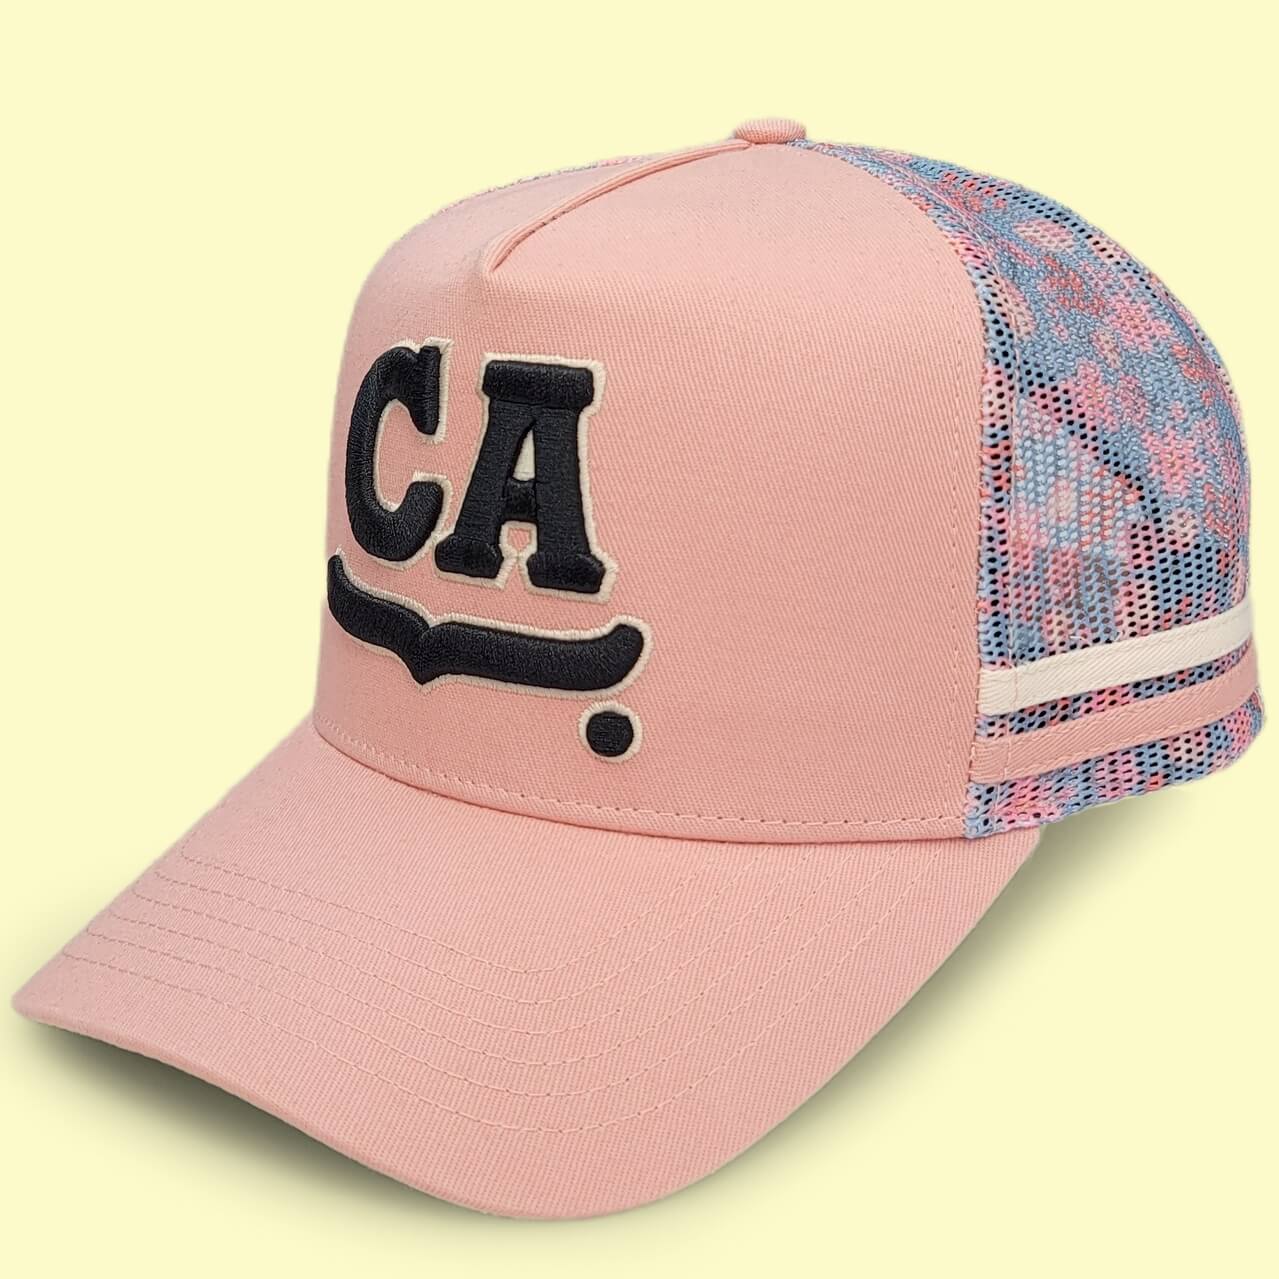 CTC-3035(Wholesale 5 Panel High Profile Structured Crown Striped Mesh Trucker Hat, Australia 2 Side Stripes Country Trucker Caps)